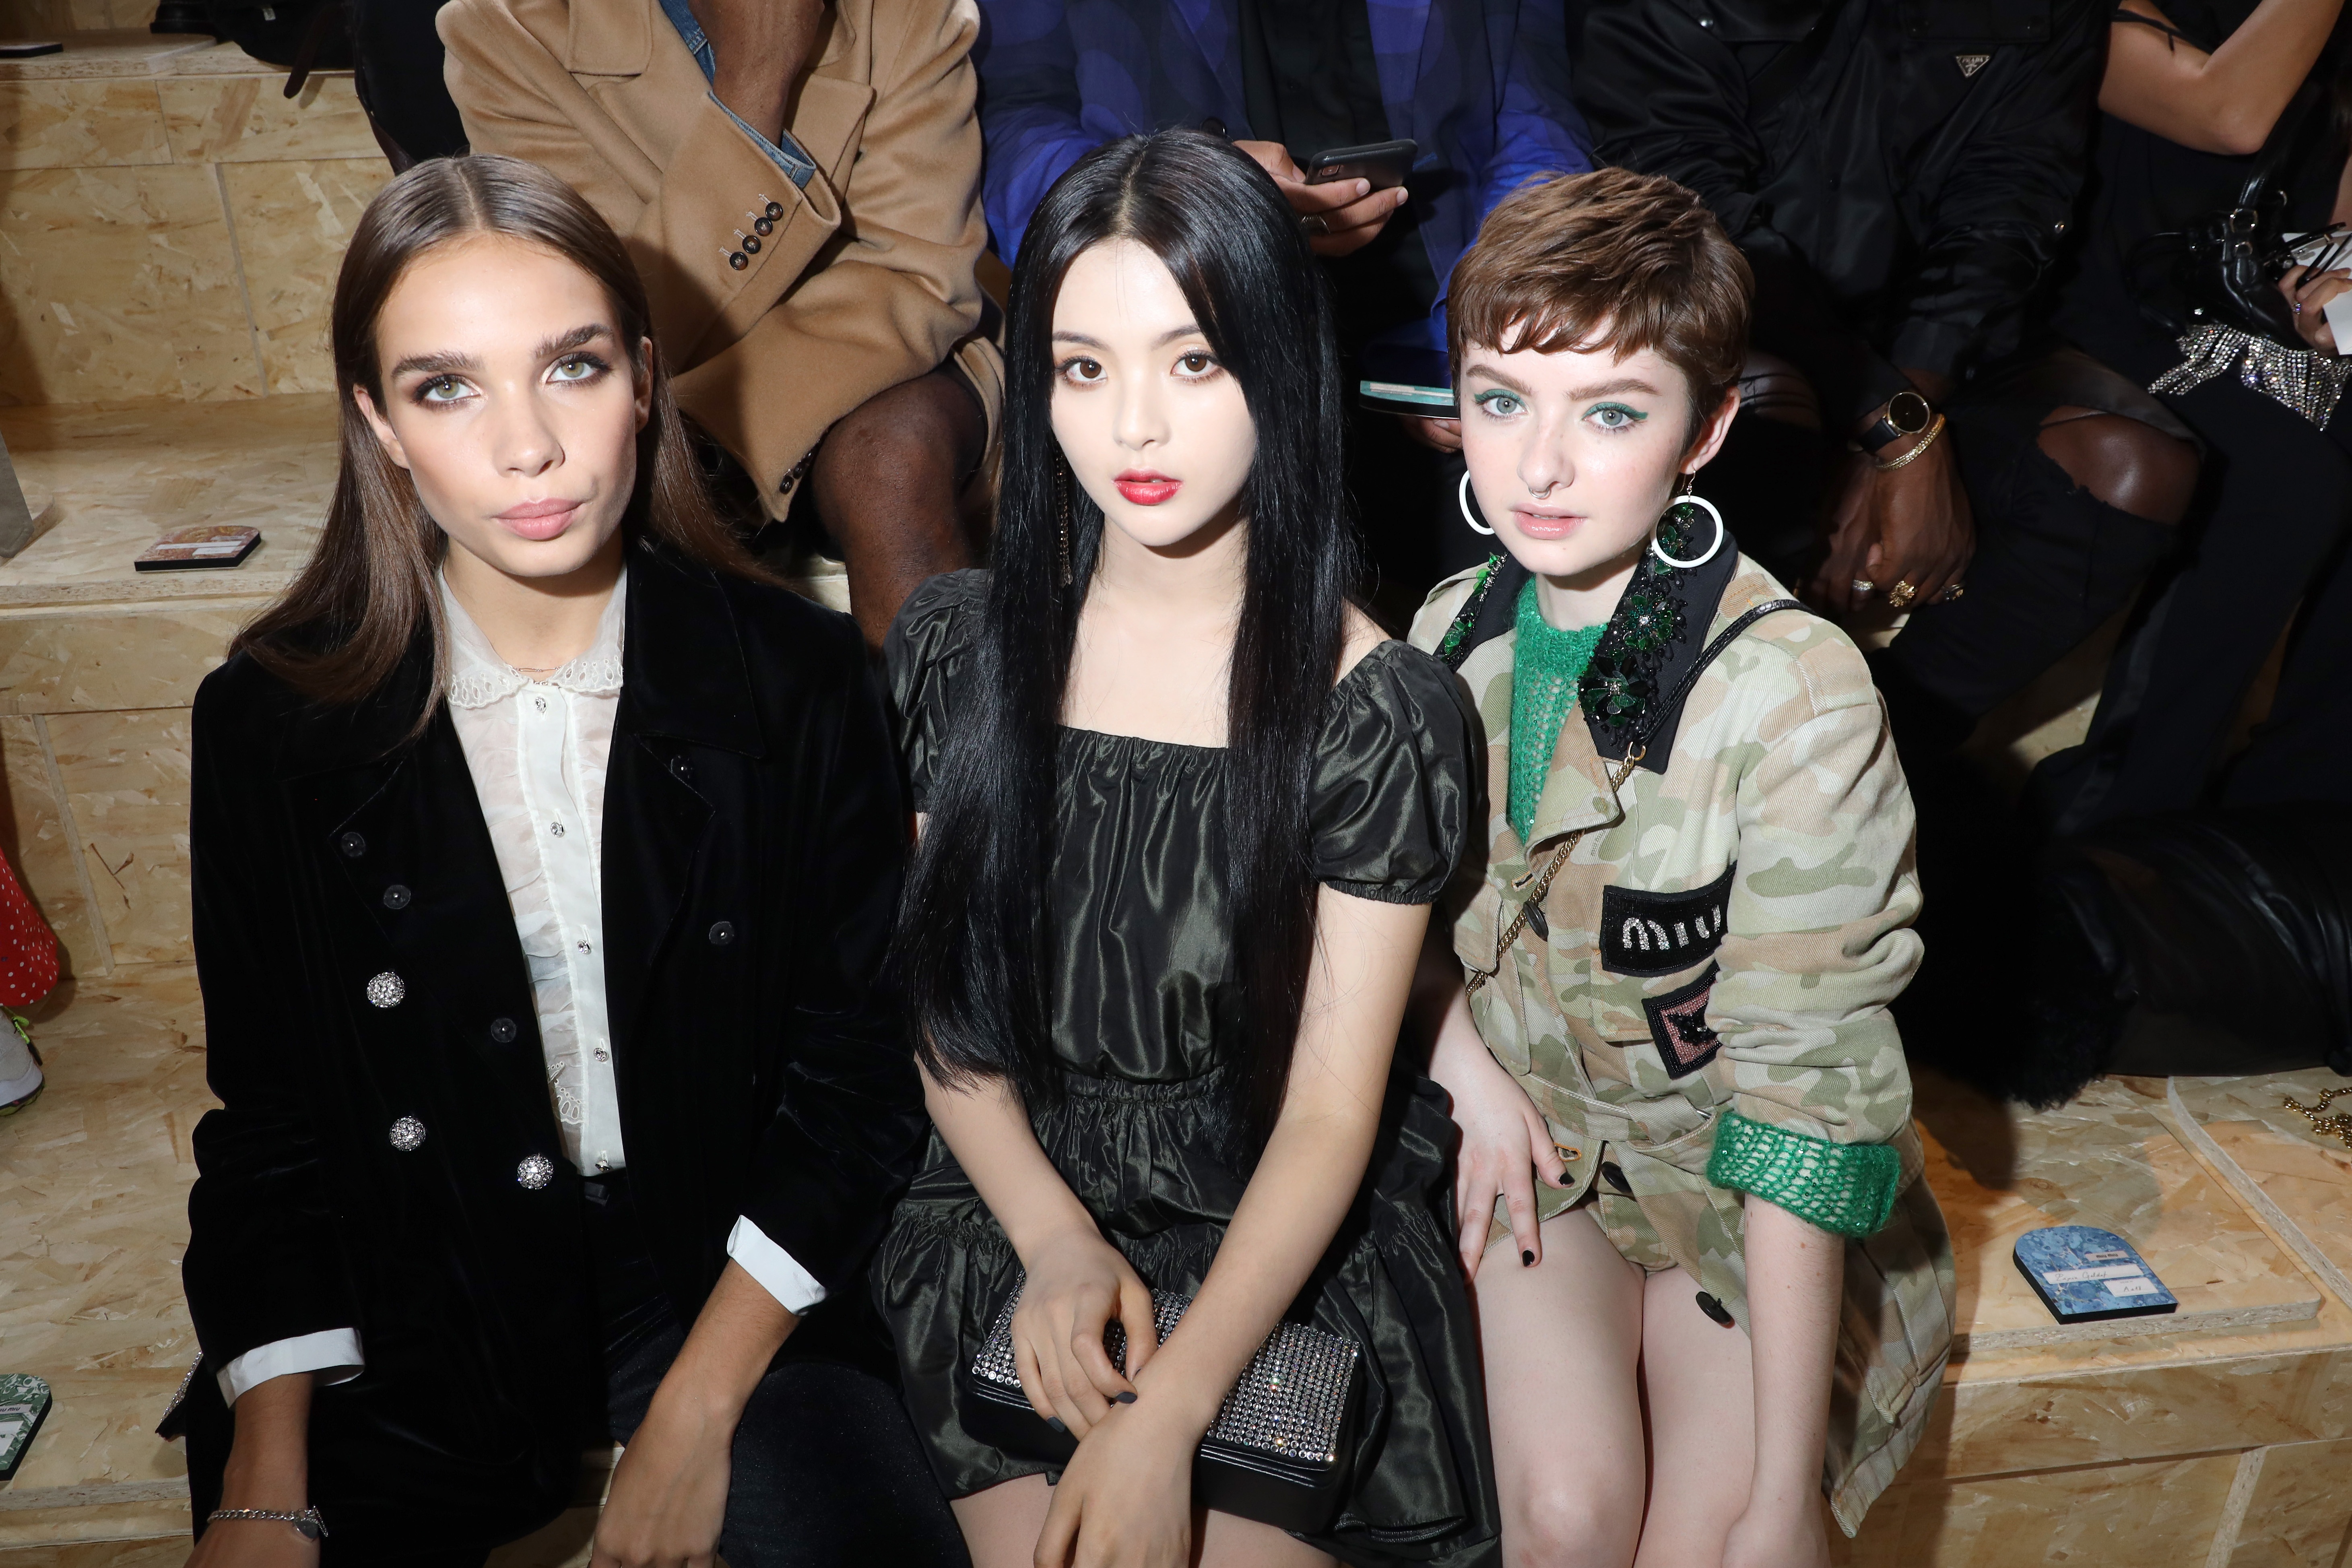 Left to right: Hanna Cross, Yang Chaoyue and Lachlan Watson attend the Miu Miu Womenswear Spring/Summer 2020 show as part of Paris Fashion Week on October 01, 2019 in Paris, France. Image: Getty Images